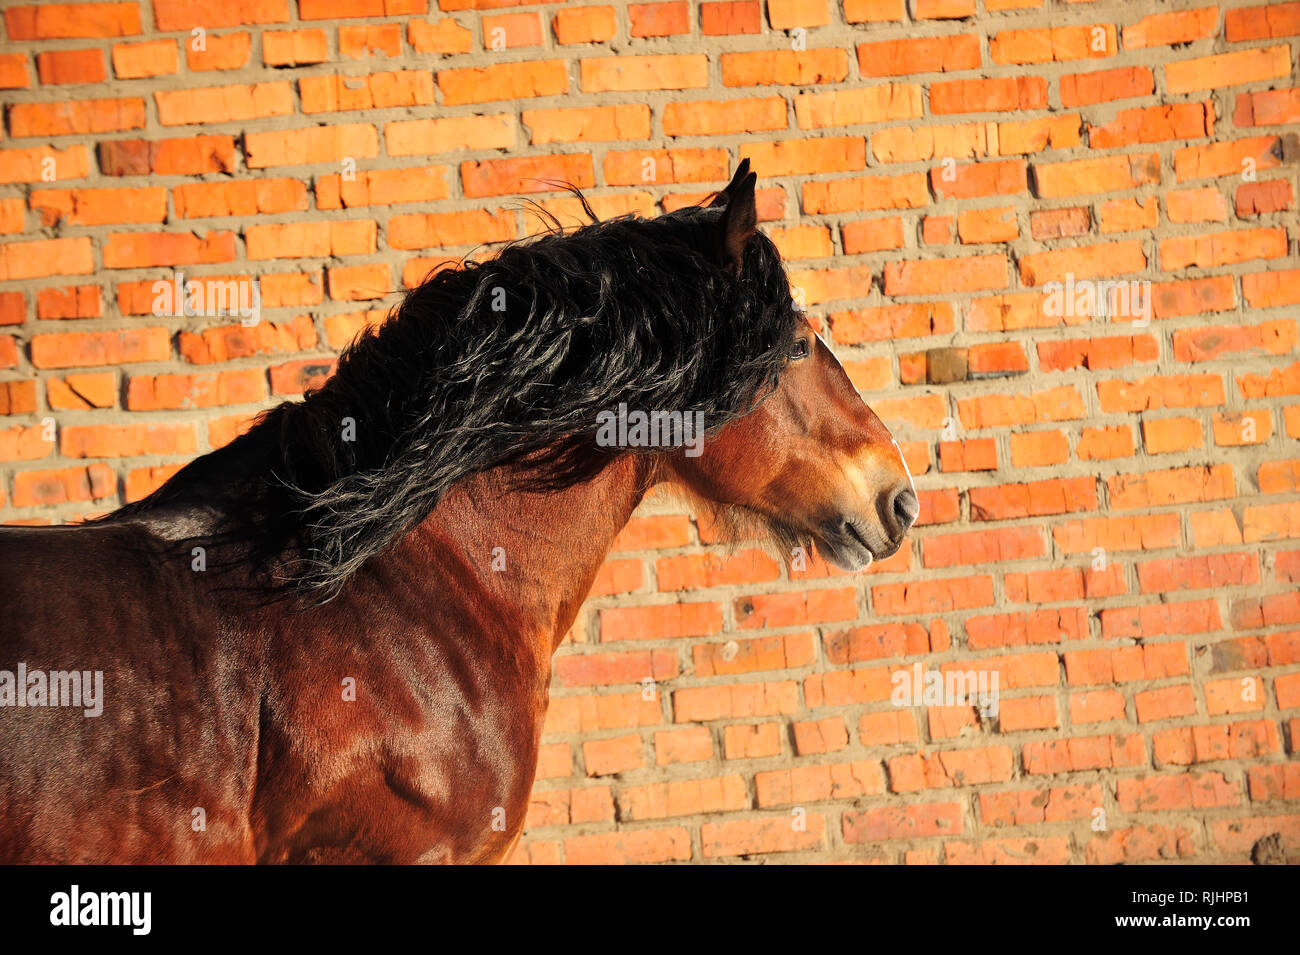 Bay draft horse with black mane stands beside red brick wall. Horizontal, side view, portrait. Stock Photo